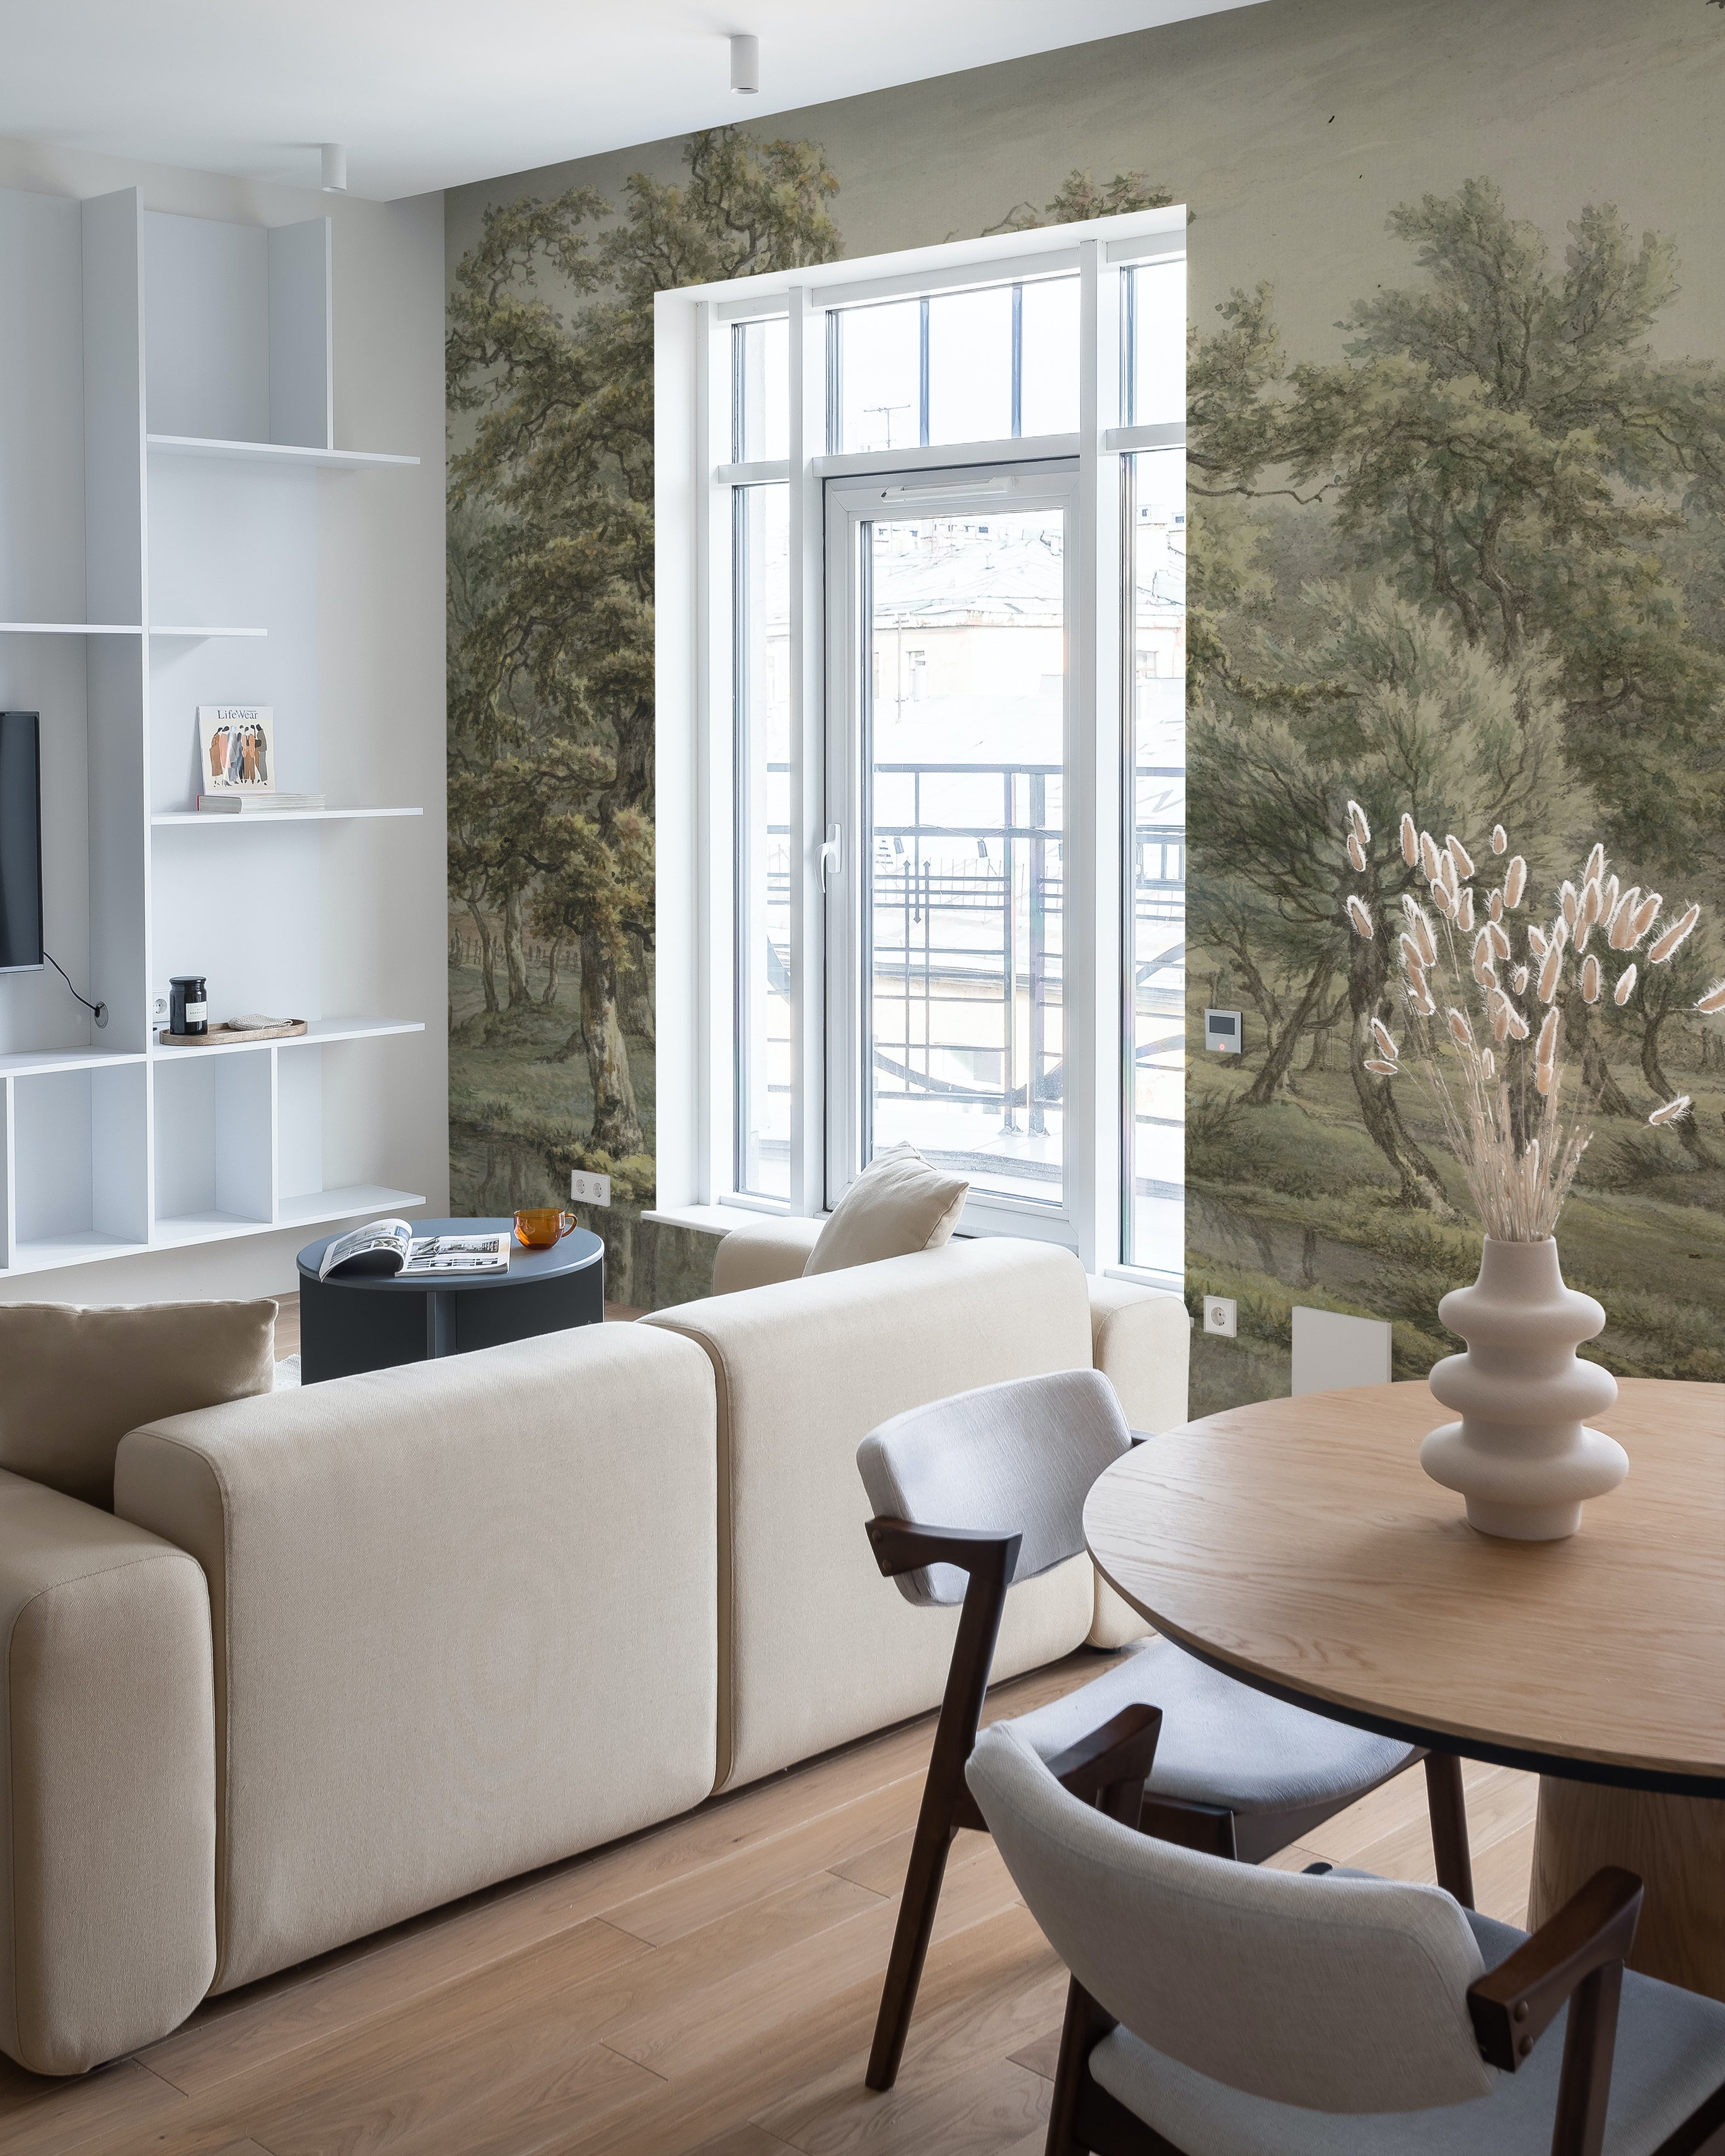 A bright and airy living room corner with a comfortable beige sofa and wooden chairs, looking out to a balcony. The wall is covered by the 'Landscape in Eext' mural, providing a stunning backdrop of vintage greenery and tranquil nature.